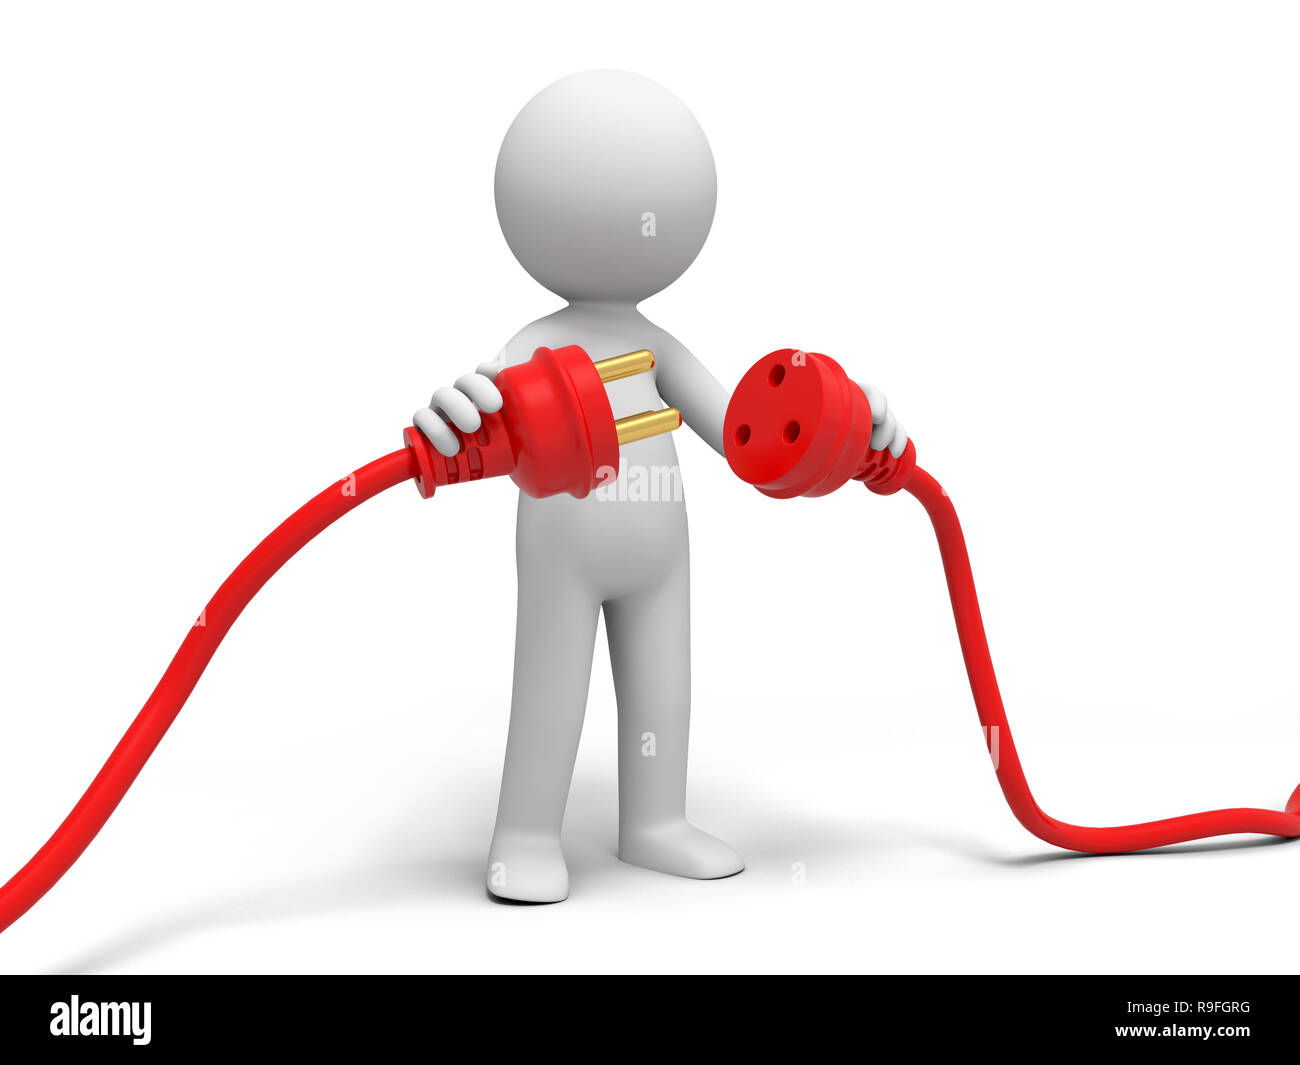 Plug,powder cord,a person connecting plugs Stock Photo